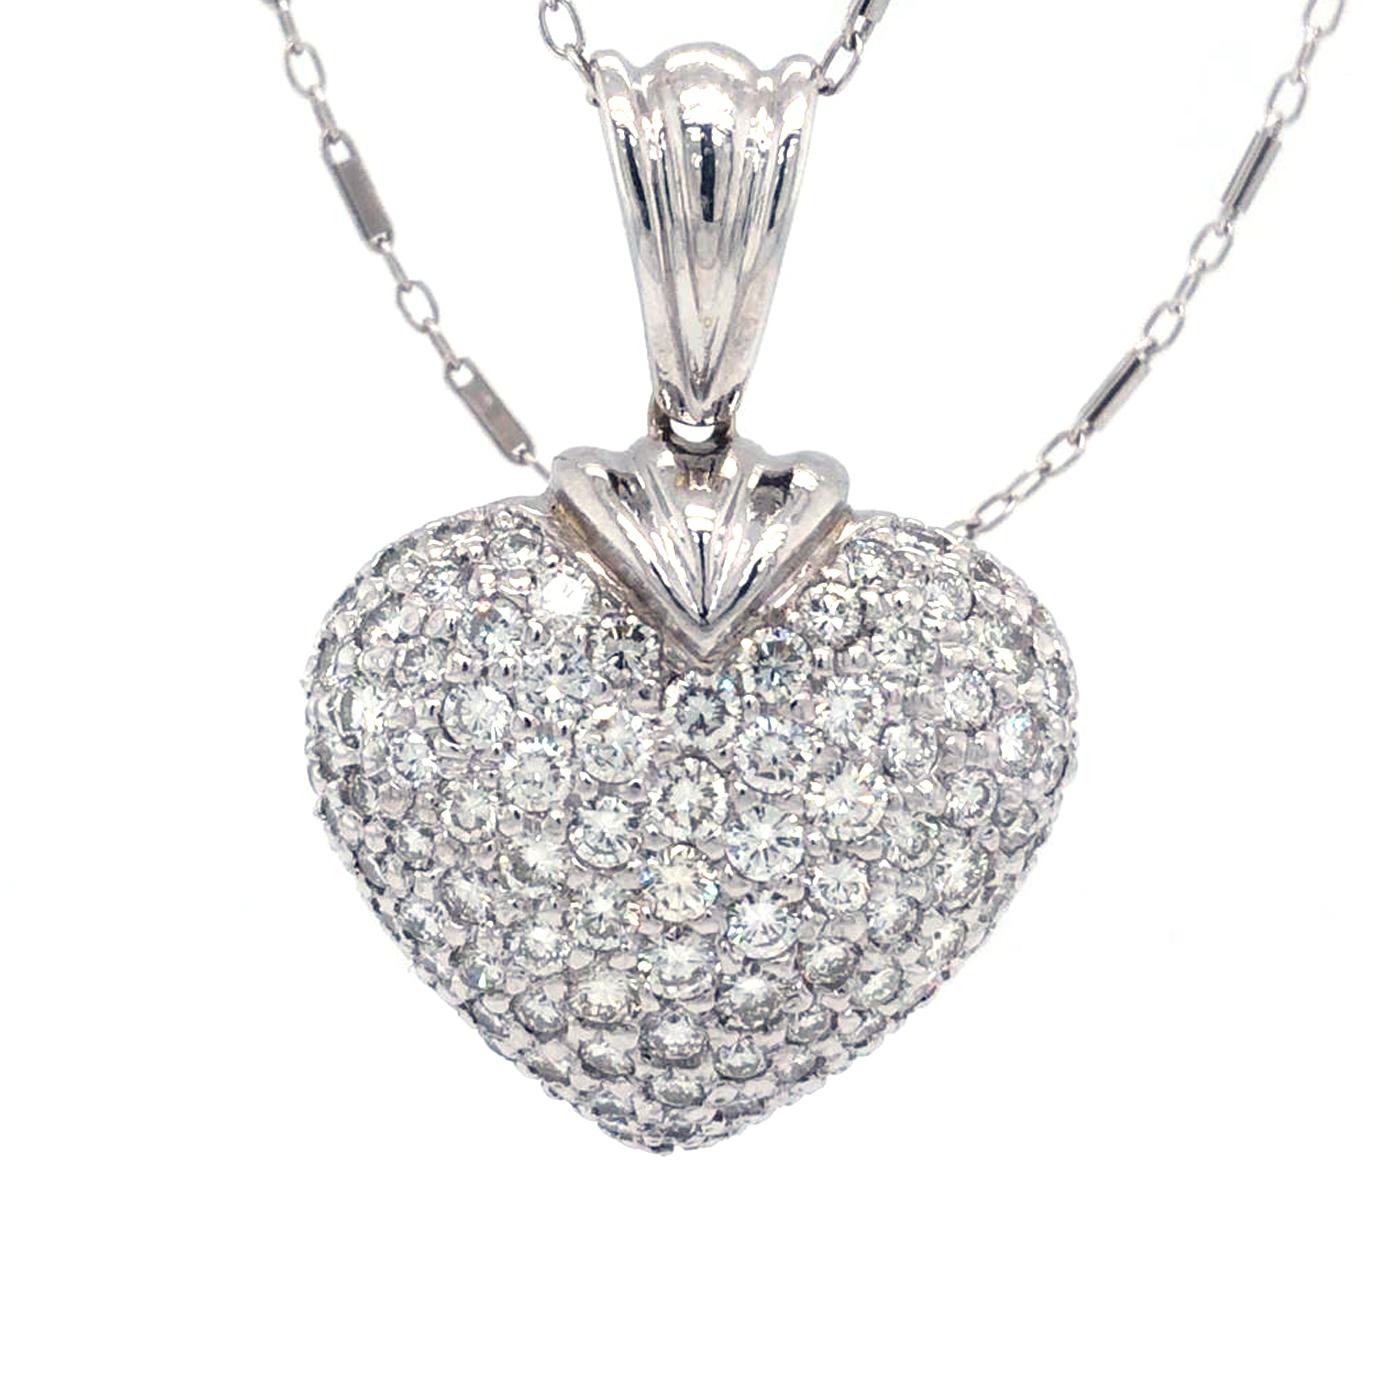 A Modern Pave Heart Pendent Necklace Crafted in 18K White Gold.
Beautiful heart pendant/necklace with 3.5ct of round cut natural diamonds in a stunning paved setting. Also featuring a solid 18k White Gold. Authentic Pendant/Necklace.
3.5 ct. White